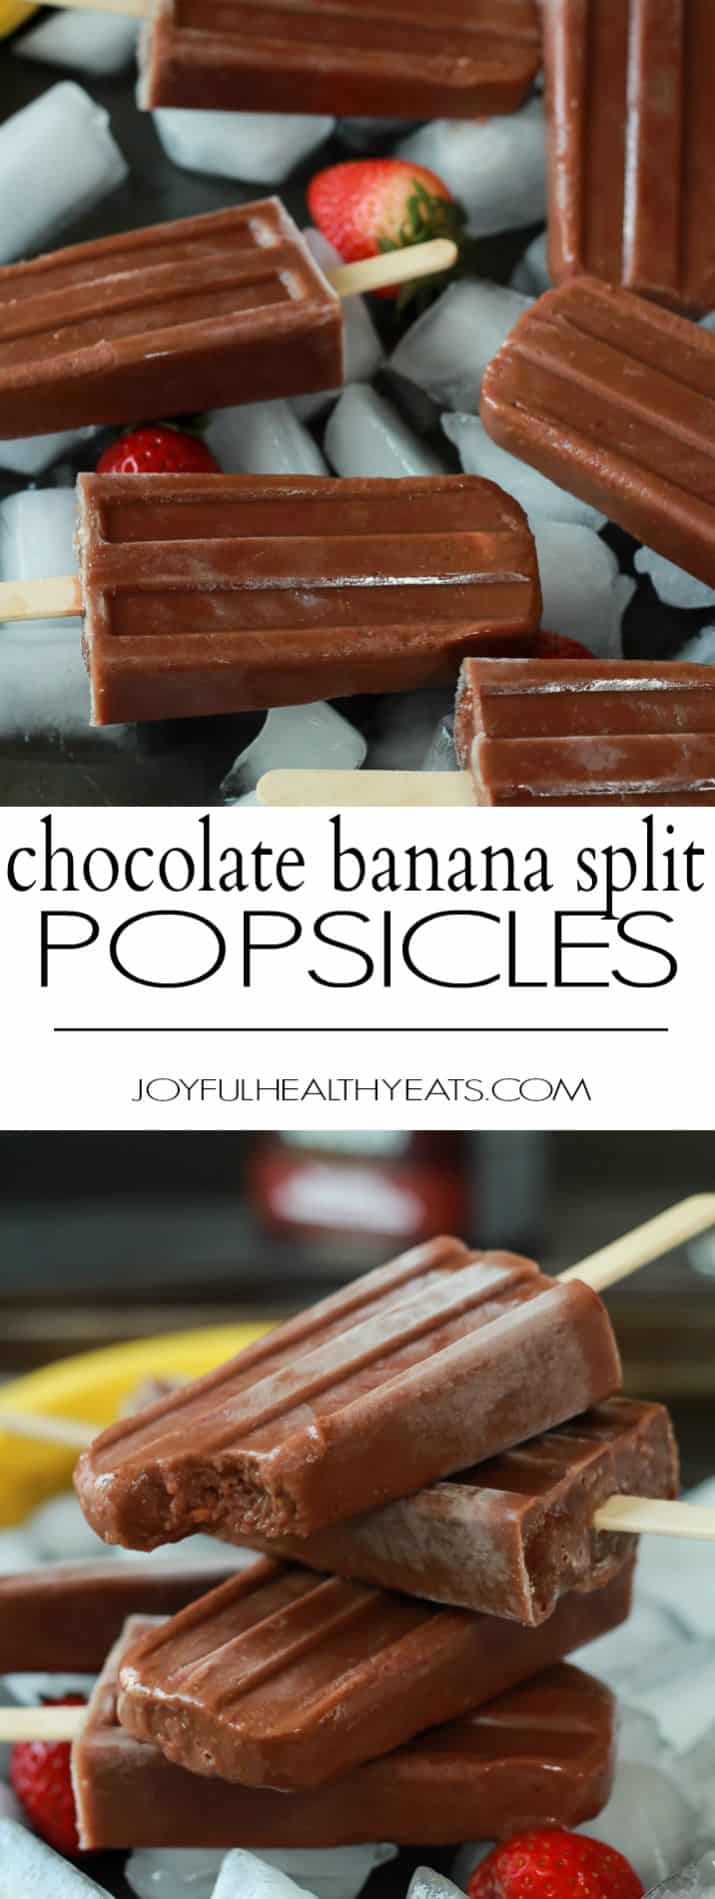 Healthy sugar free and dairy free Chocolate Banana Split Popsicles made with only 5 ingredients! A perfect dessert treat to cool you down this summer! | joyfulhealthyeats.com #glutenfree #cleaneating #sugarfree